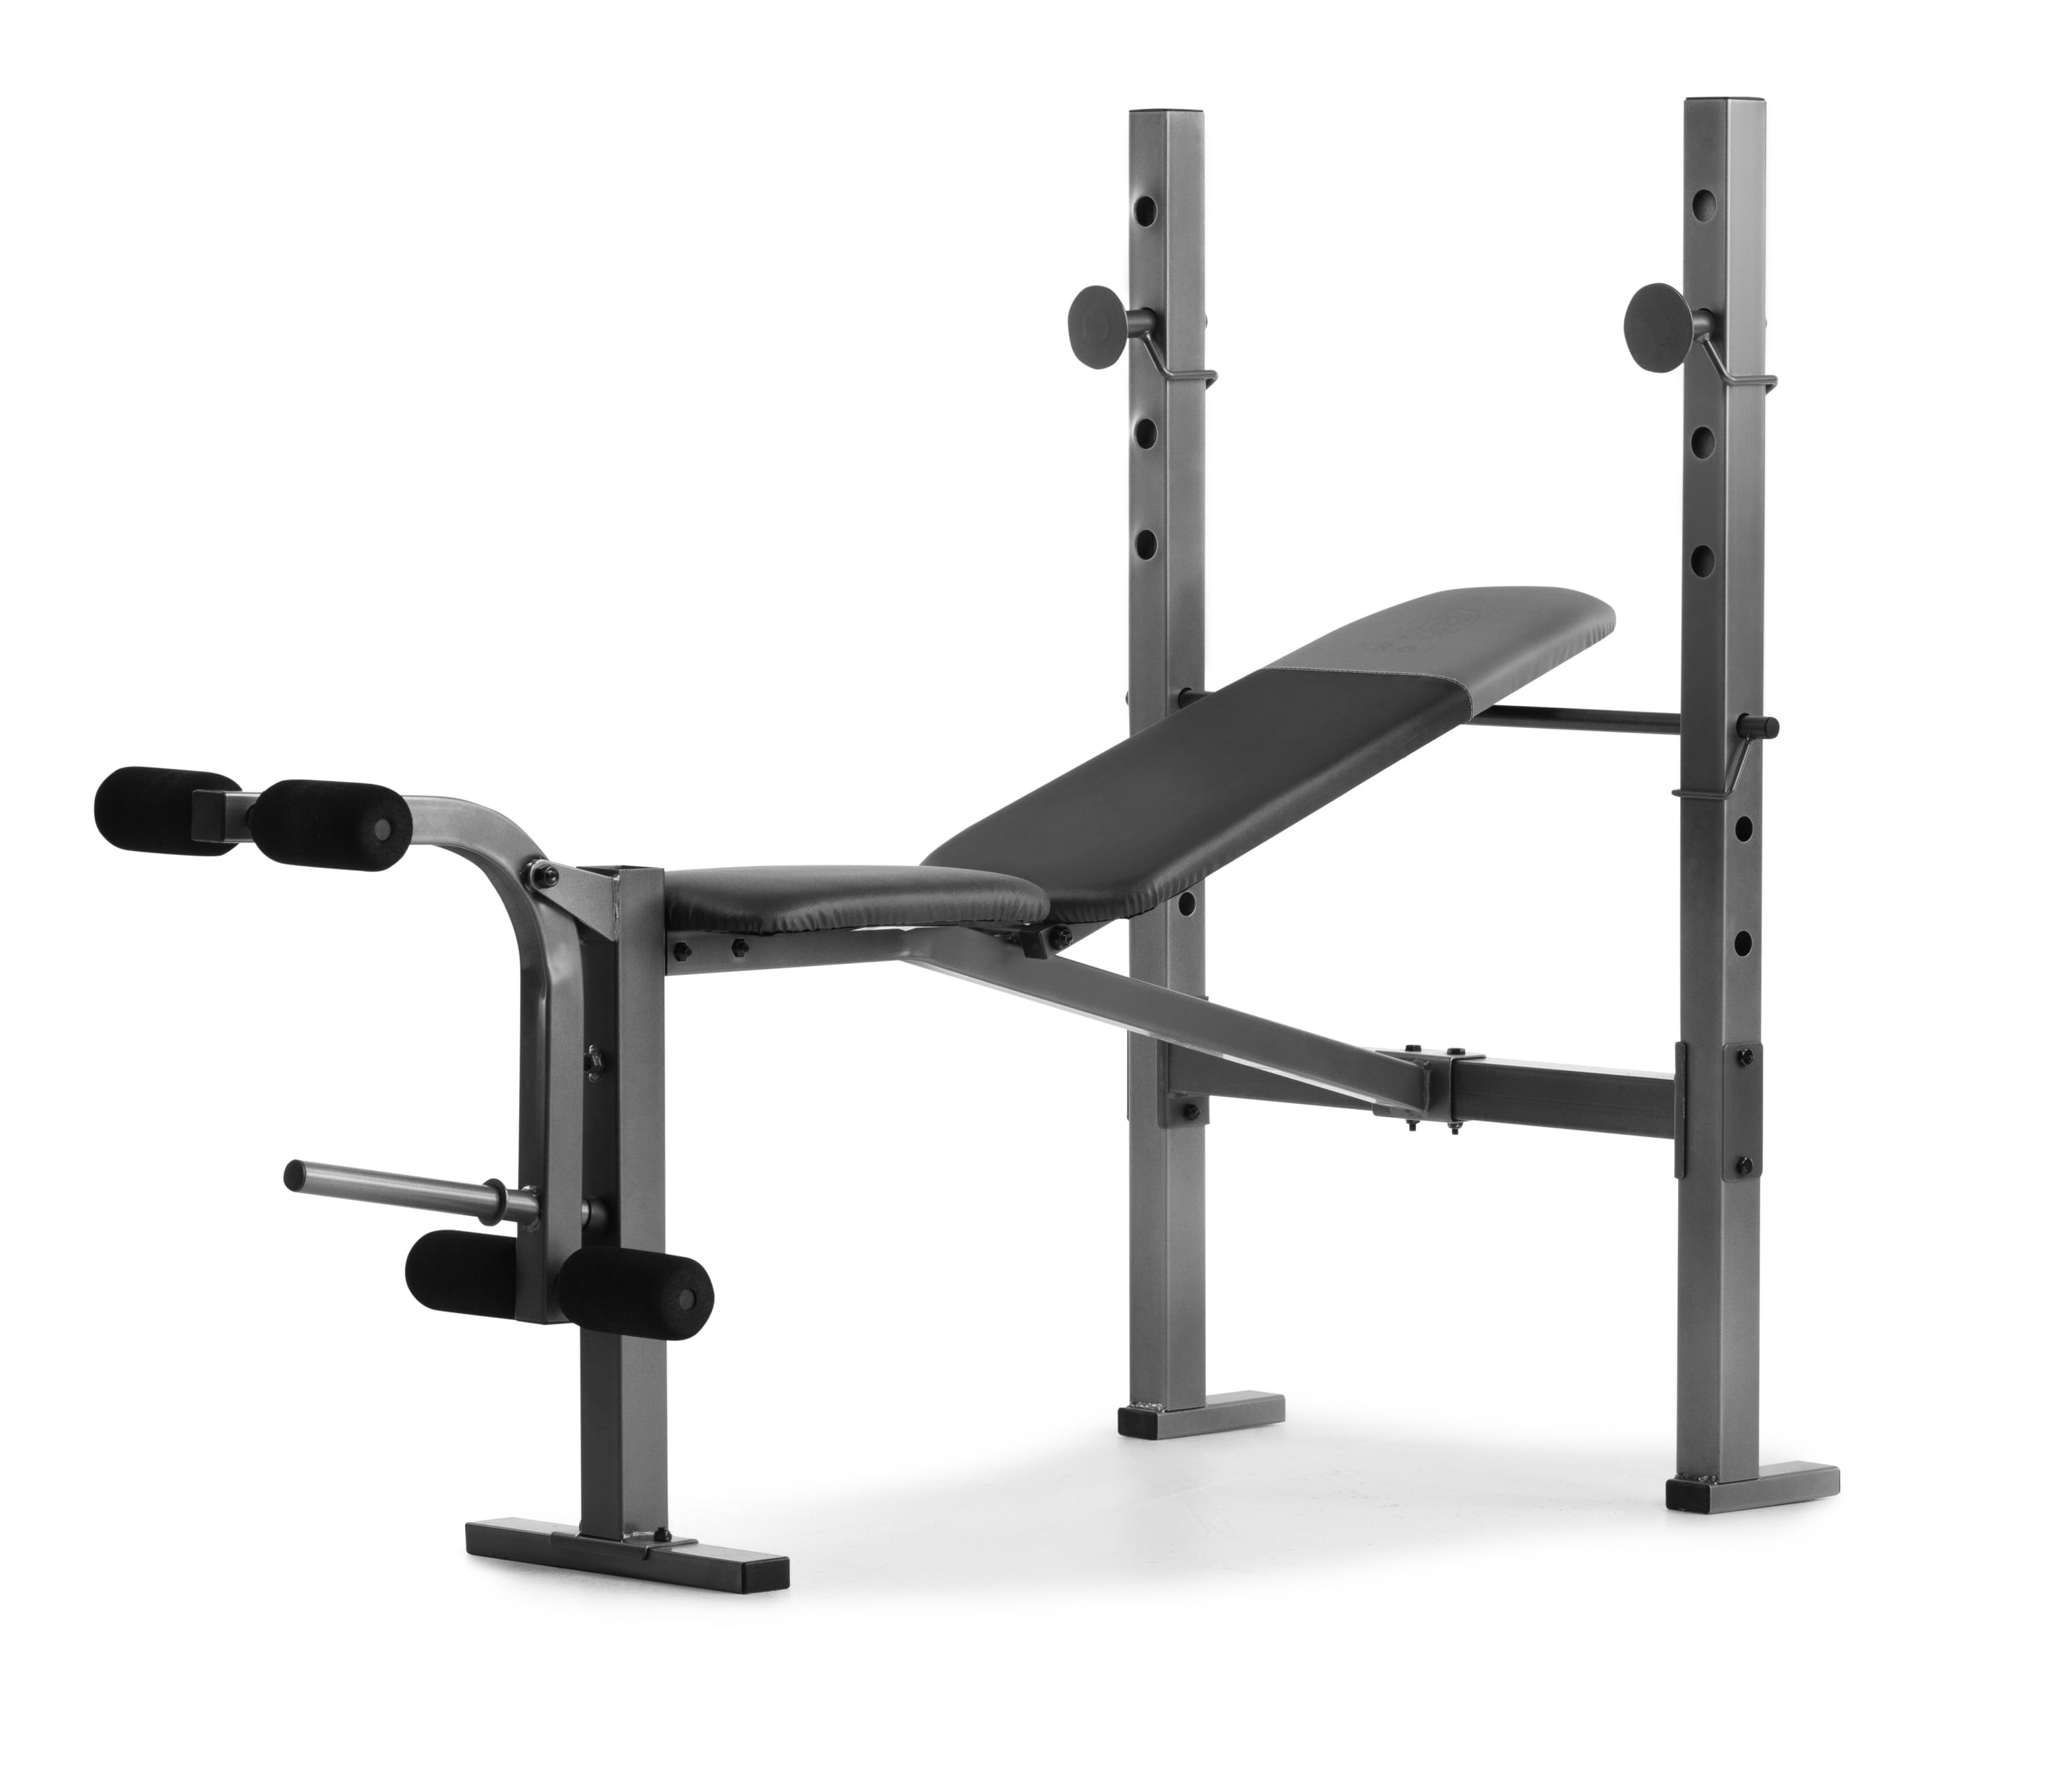 Details about   Weight Bench Set Adjustable Home Gym Press Lifting Barbell Exercise Workout440LB 